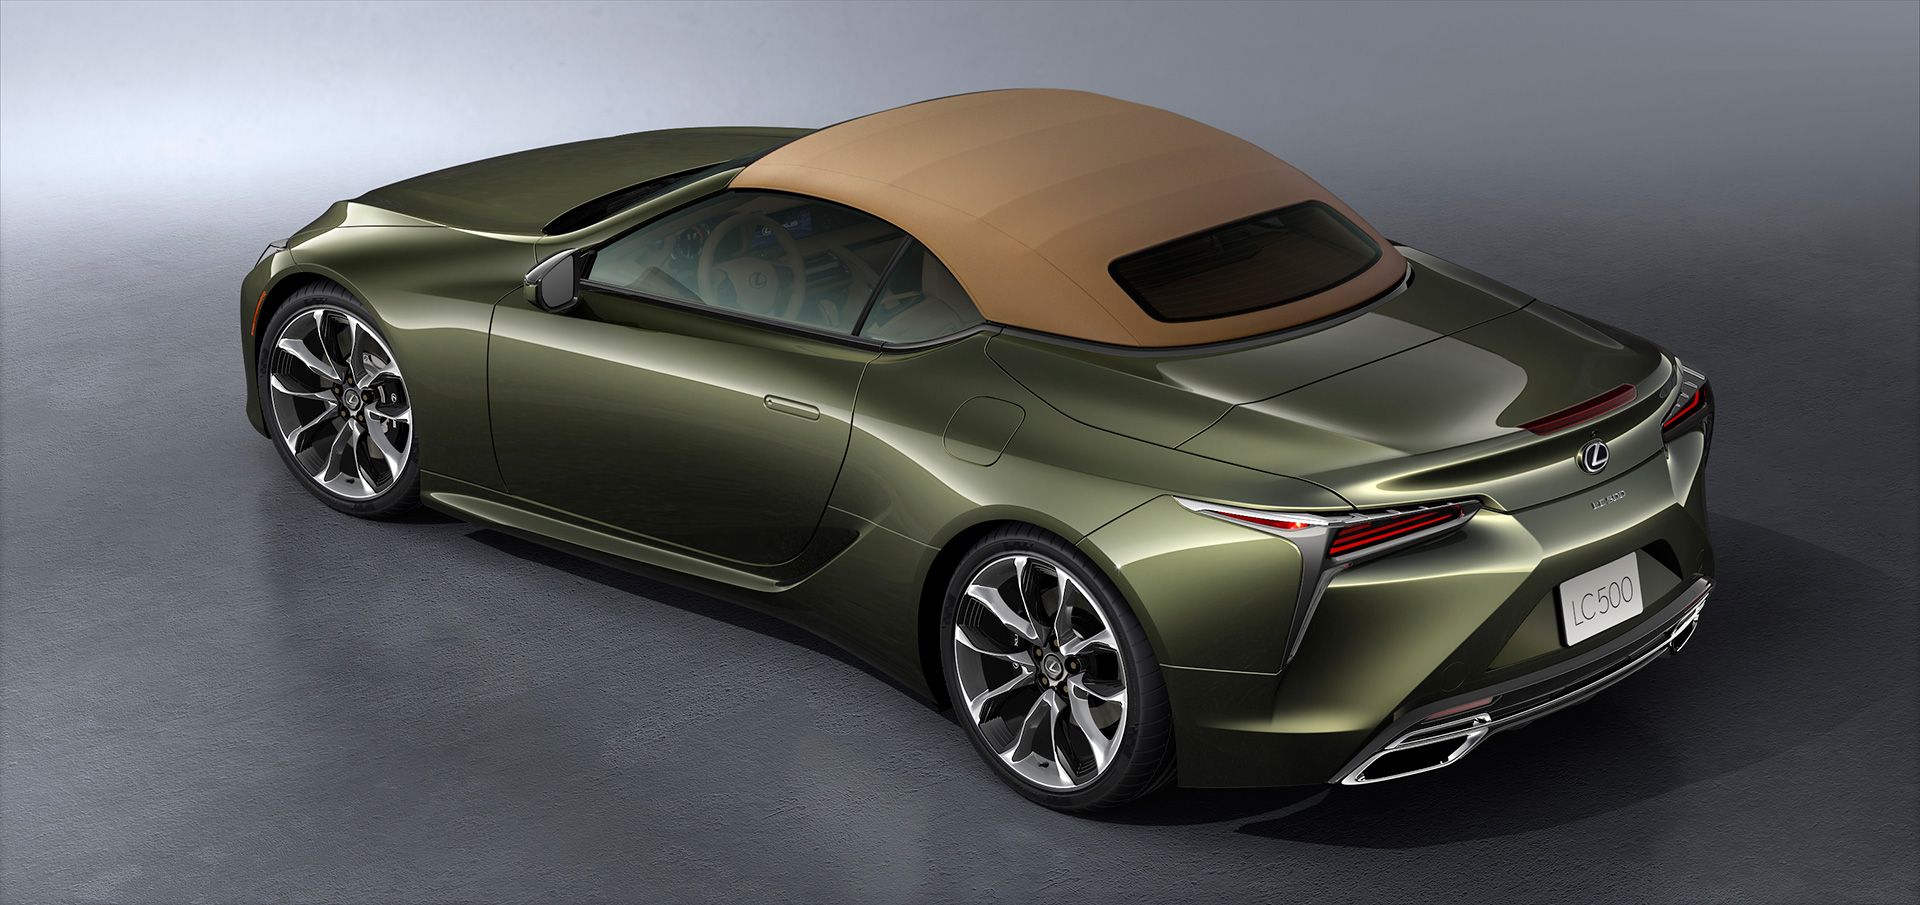 The stunning Lexus LC 500 Convertible makes its global debut at